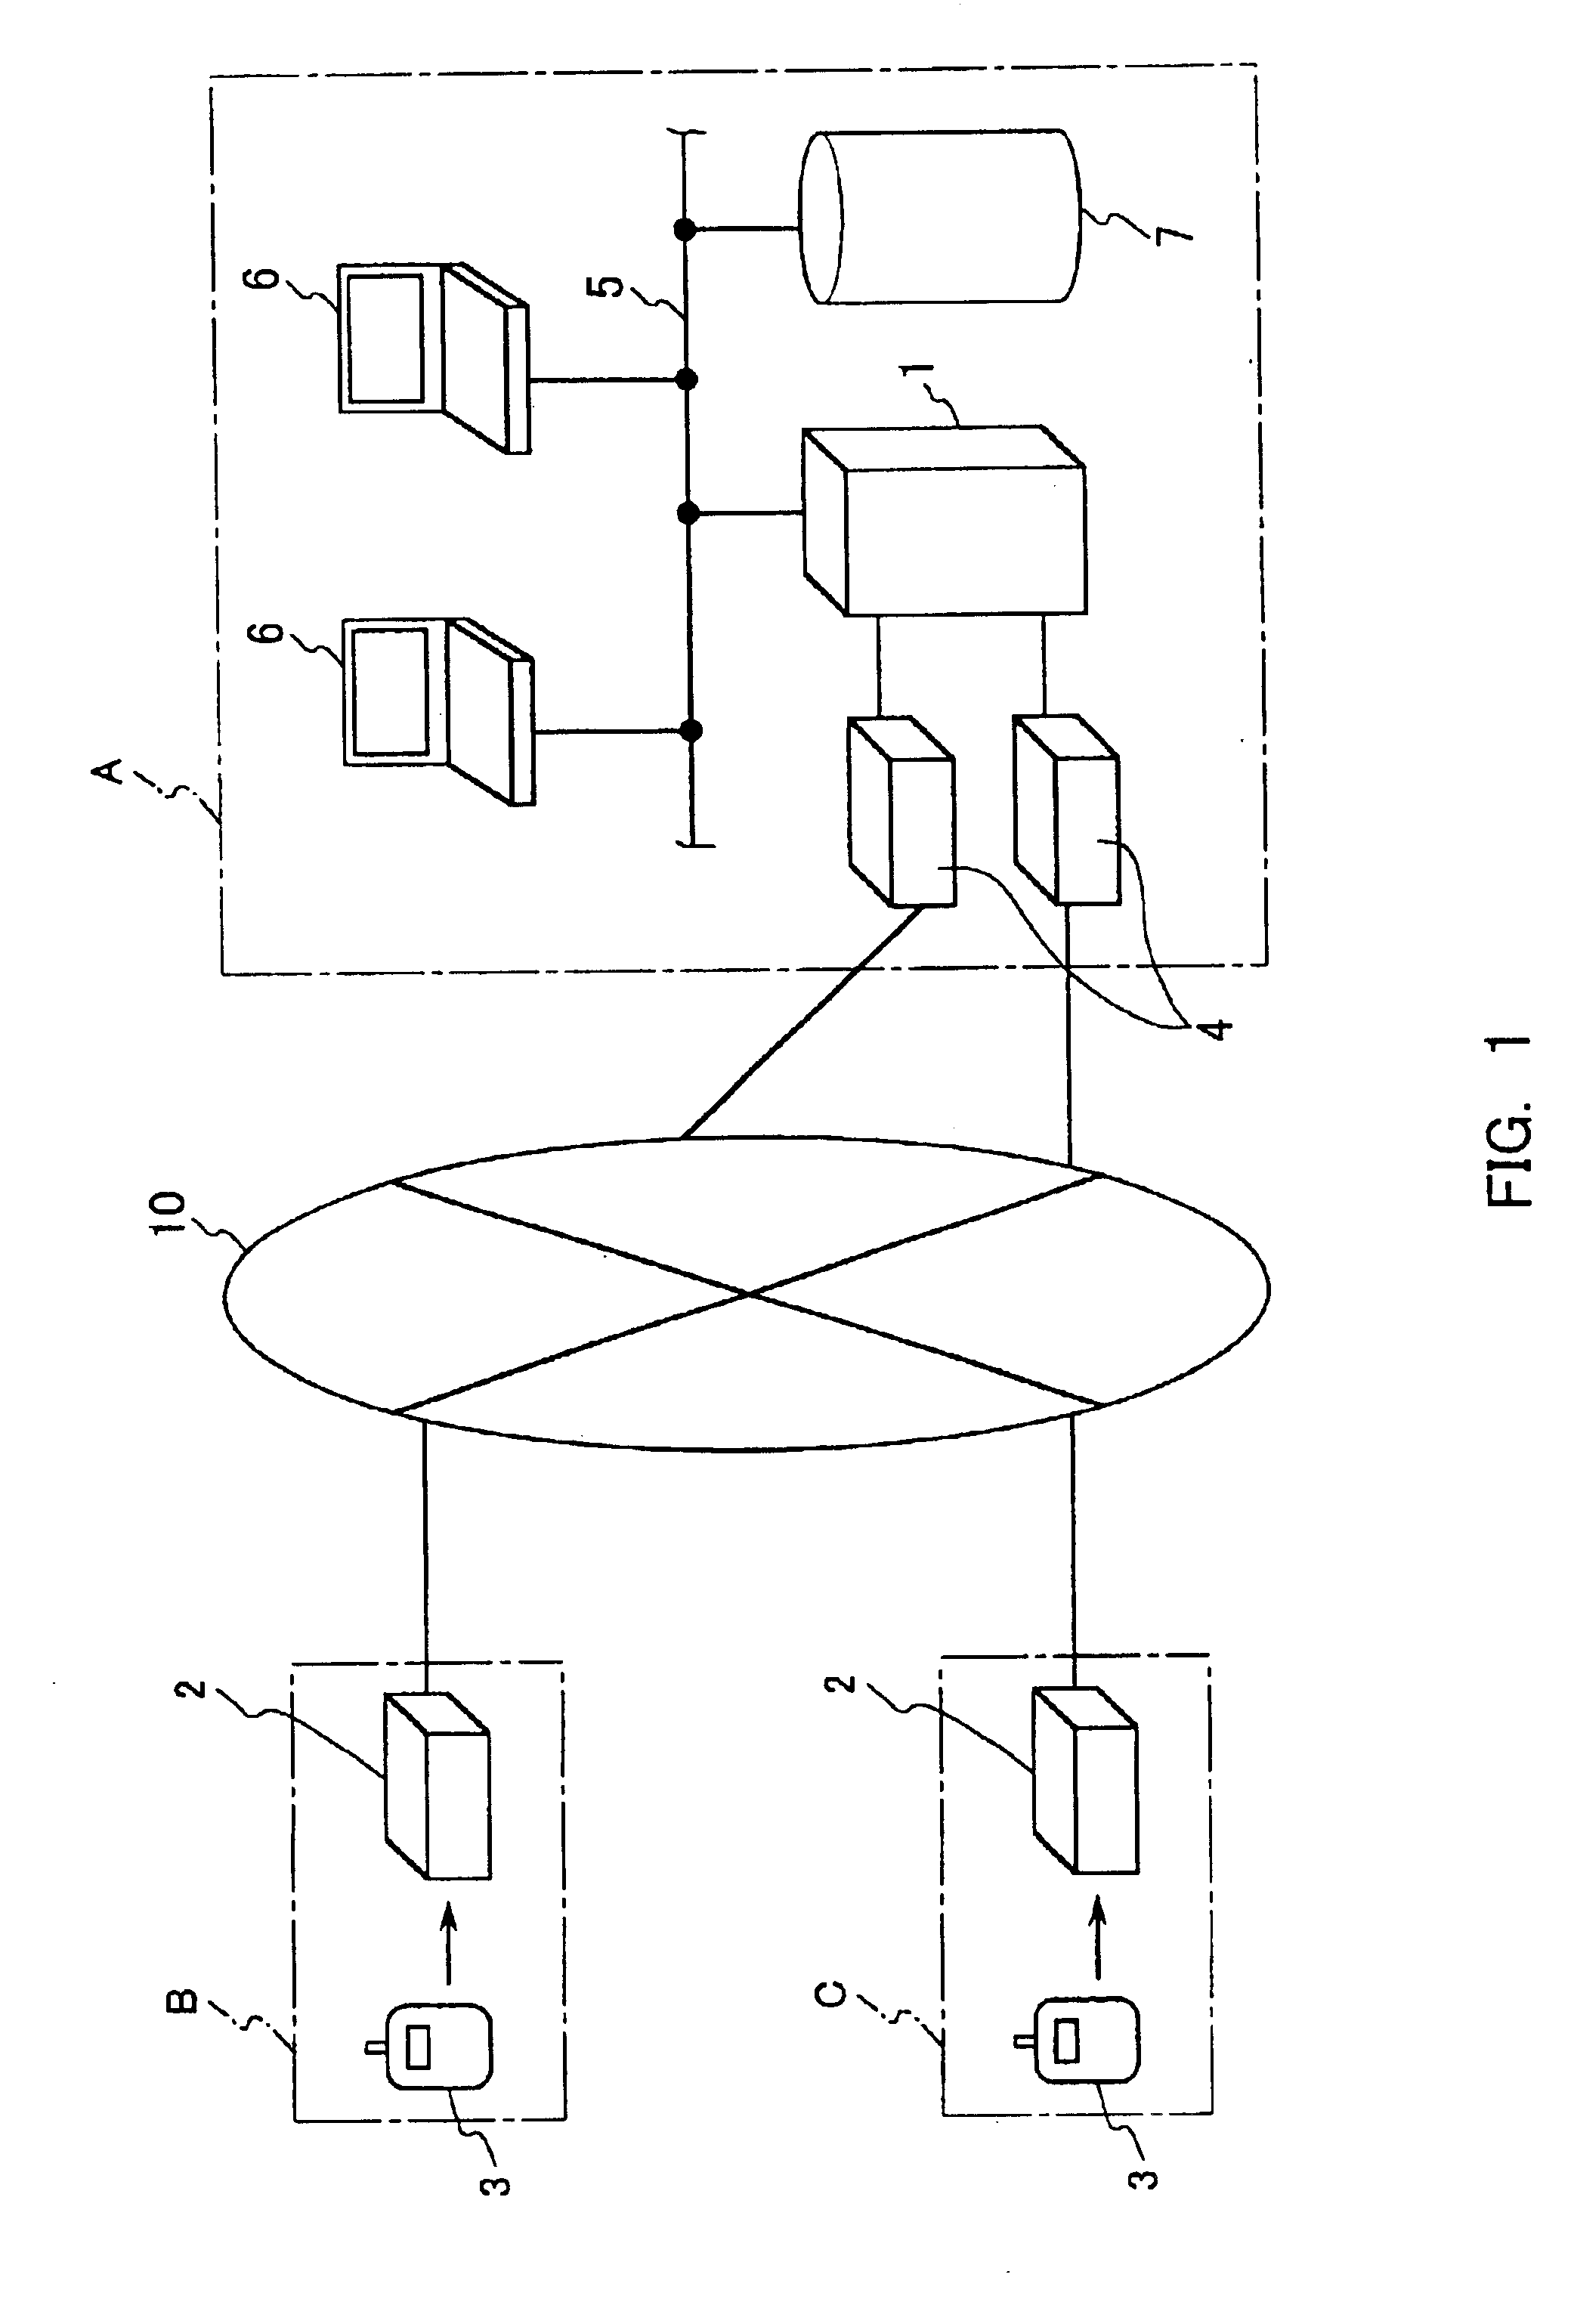 Remote data control system and measuring data gathering method